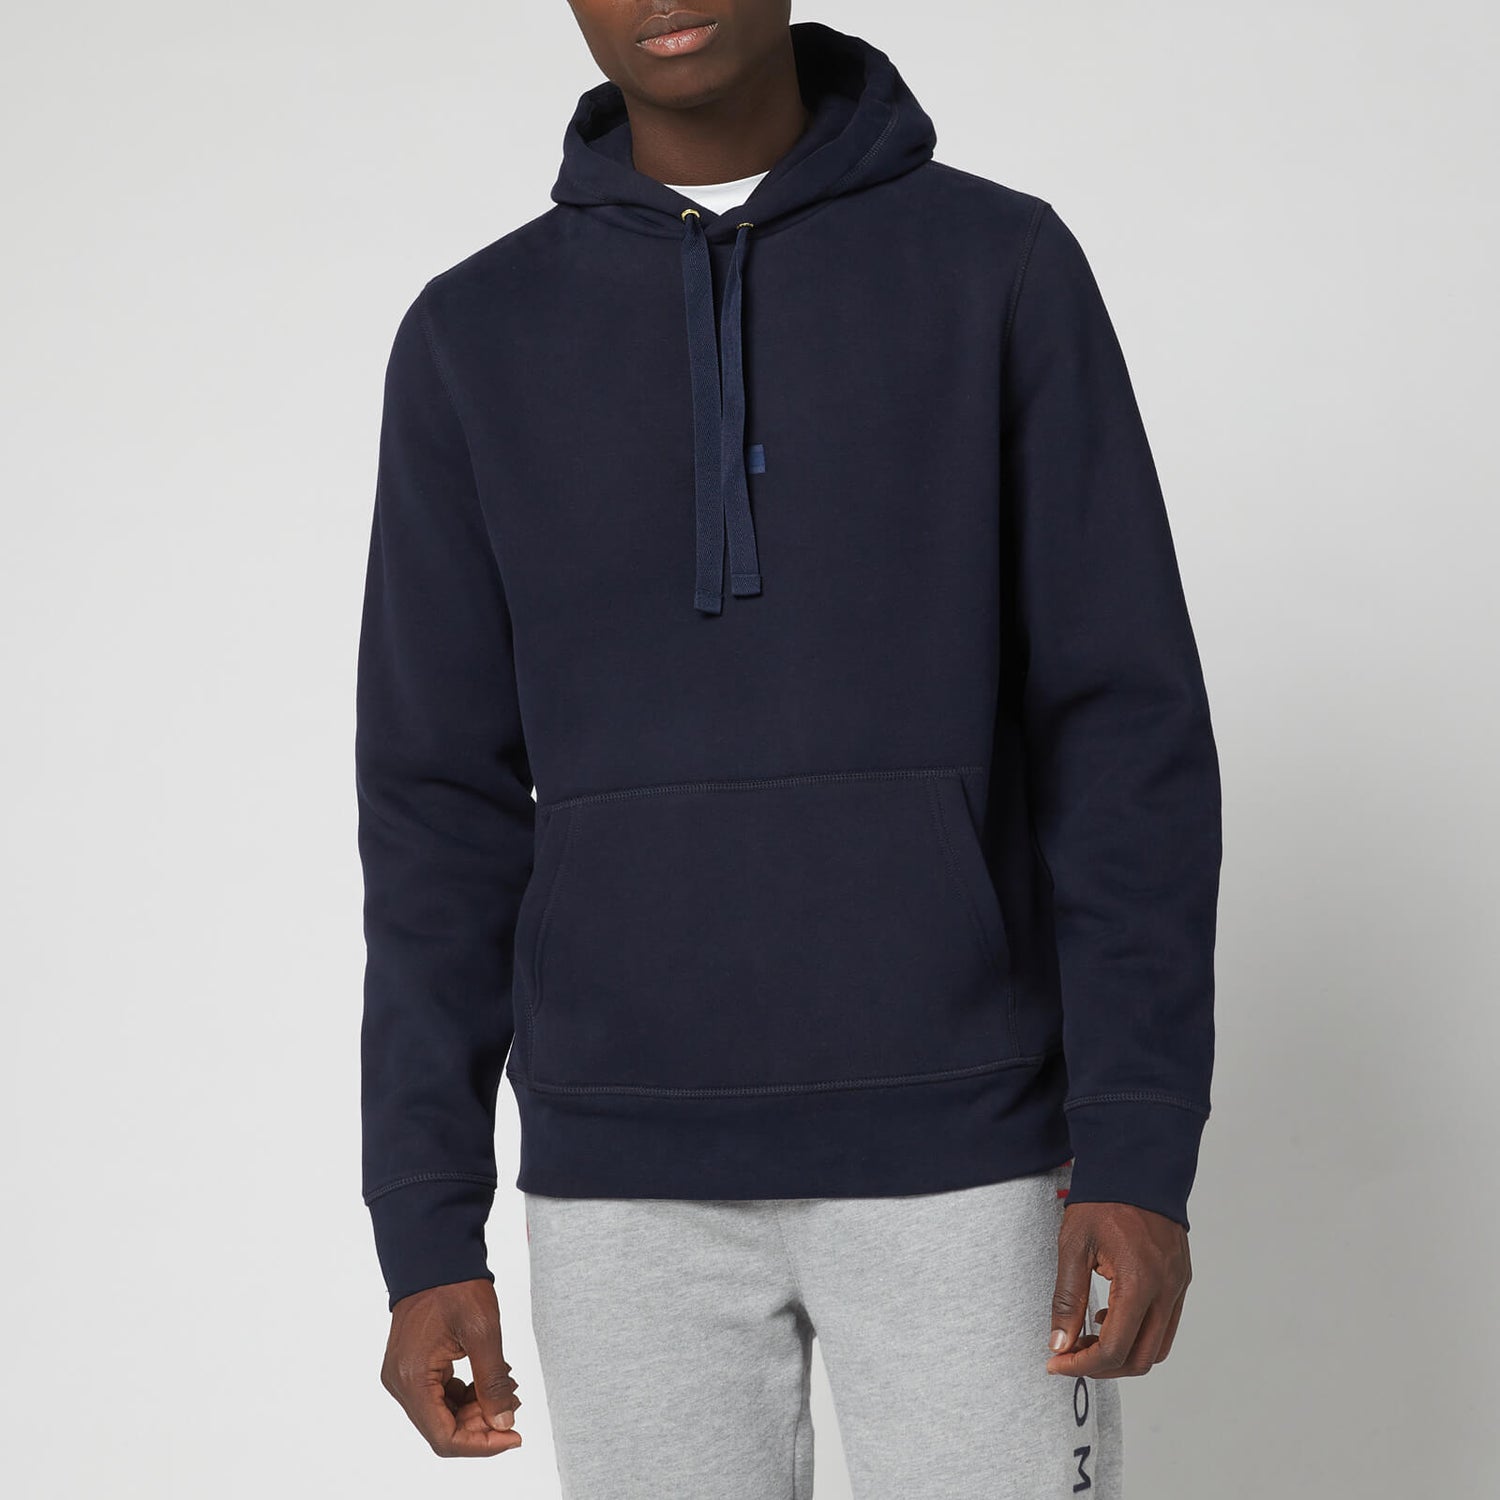 Tommy Hilfiger Men's Recycled Pullover Hoodie - Desert Sky - S